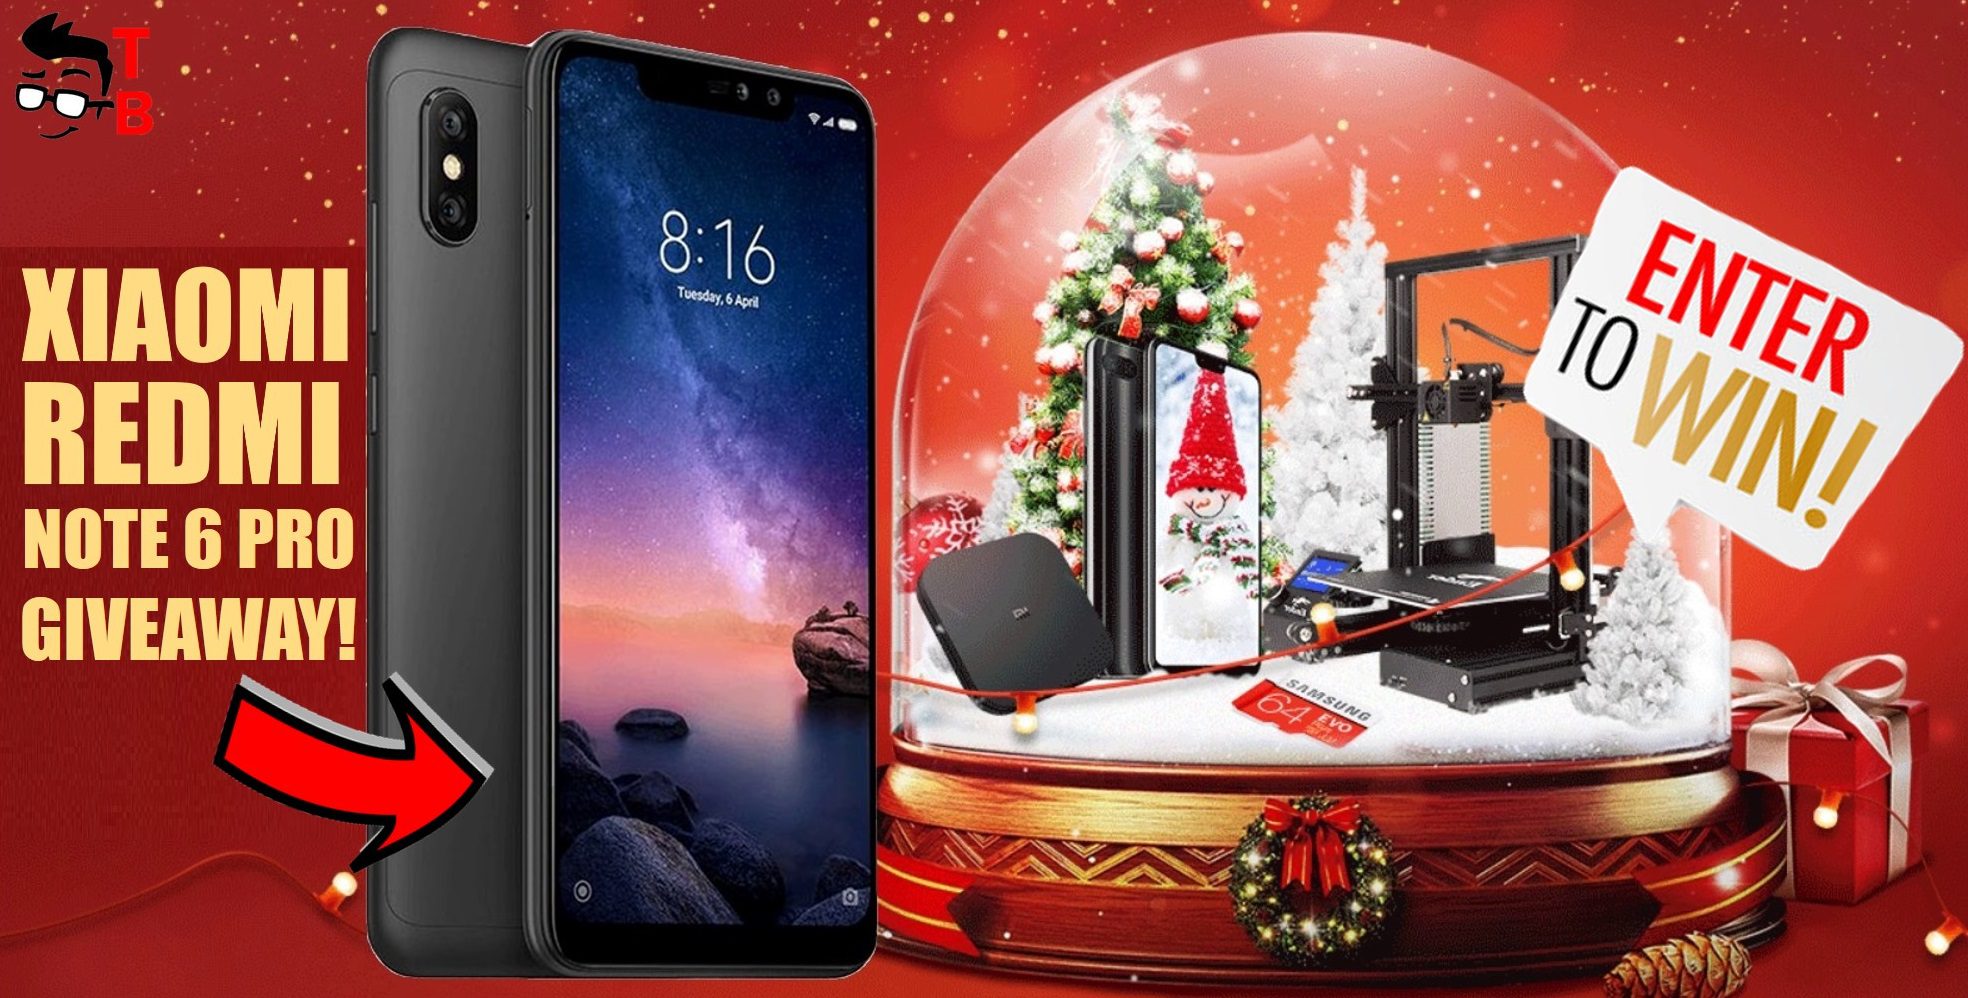 Xiaomi Redmi Note 6 Pro GIVEAWAY! Win a new smartphone for Christmas and New Year 2019! (STILL OPEN)